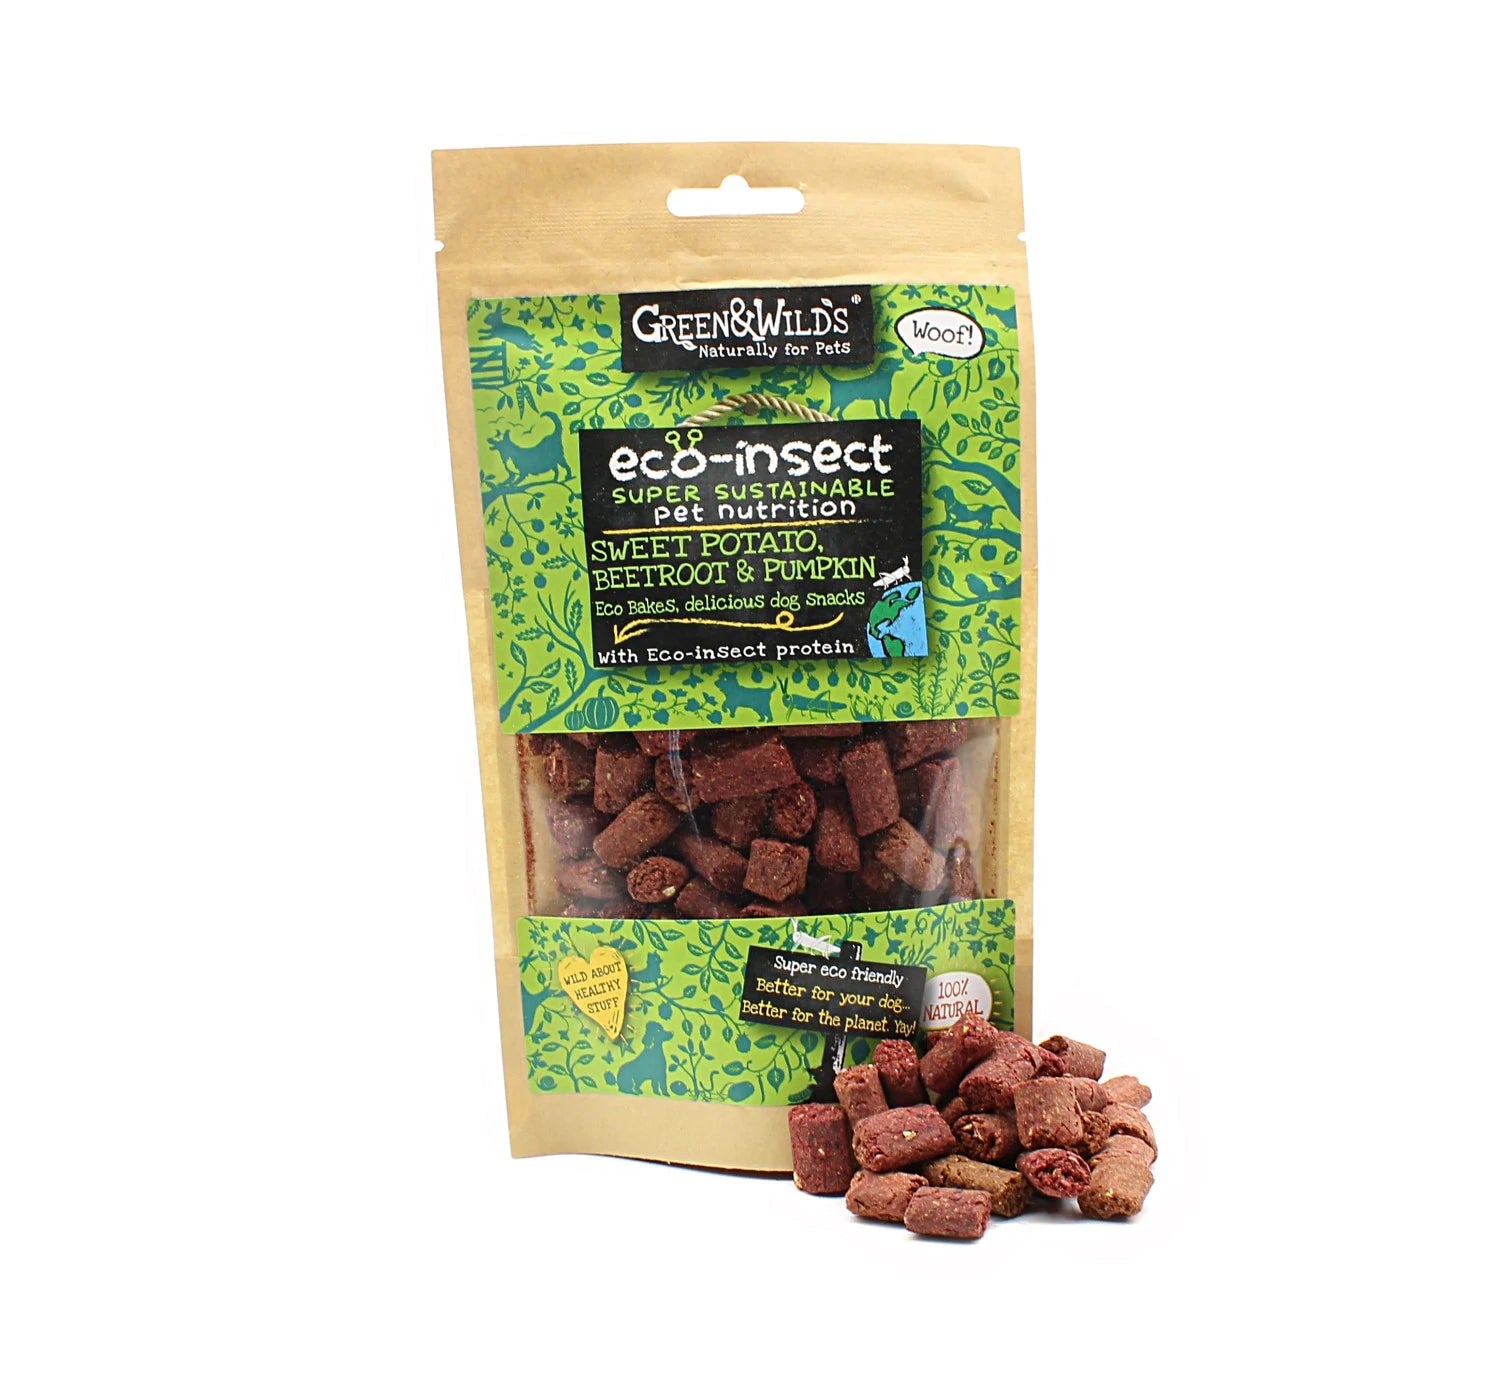 Eco insect bakes - sustainable dog treats